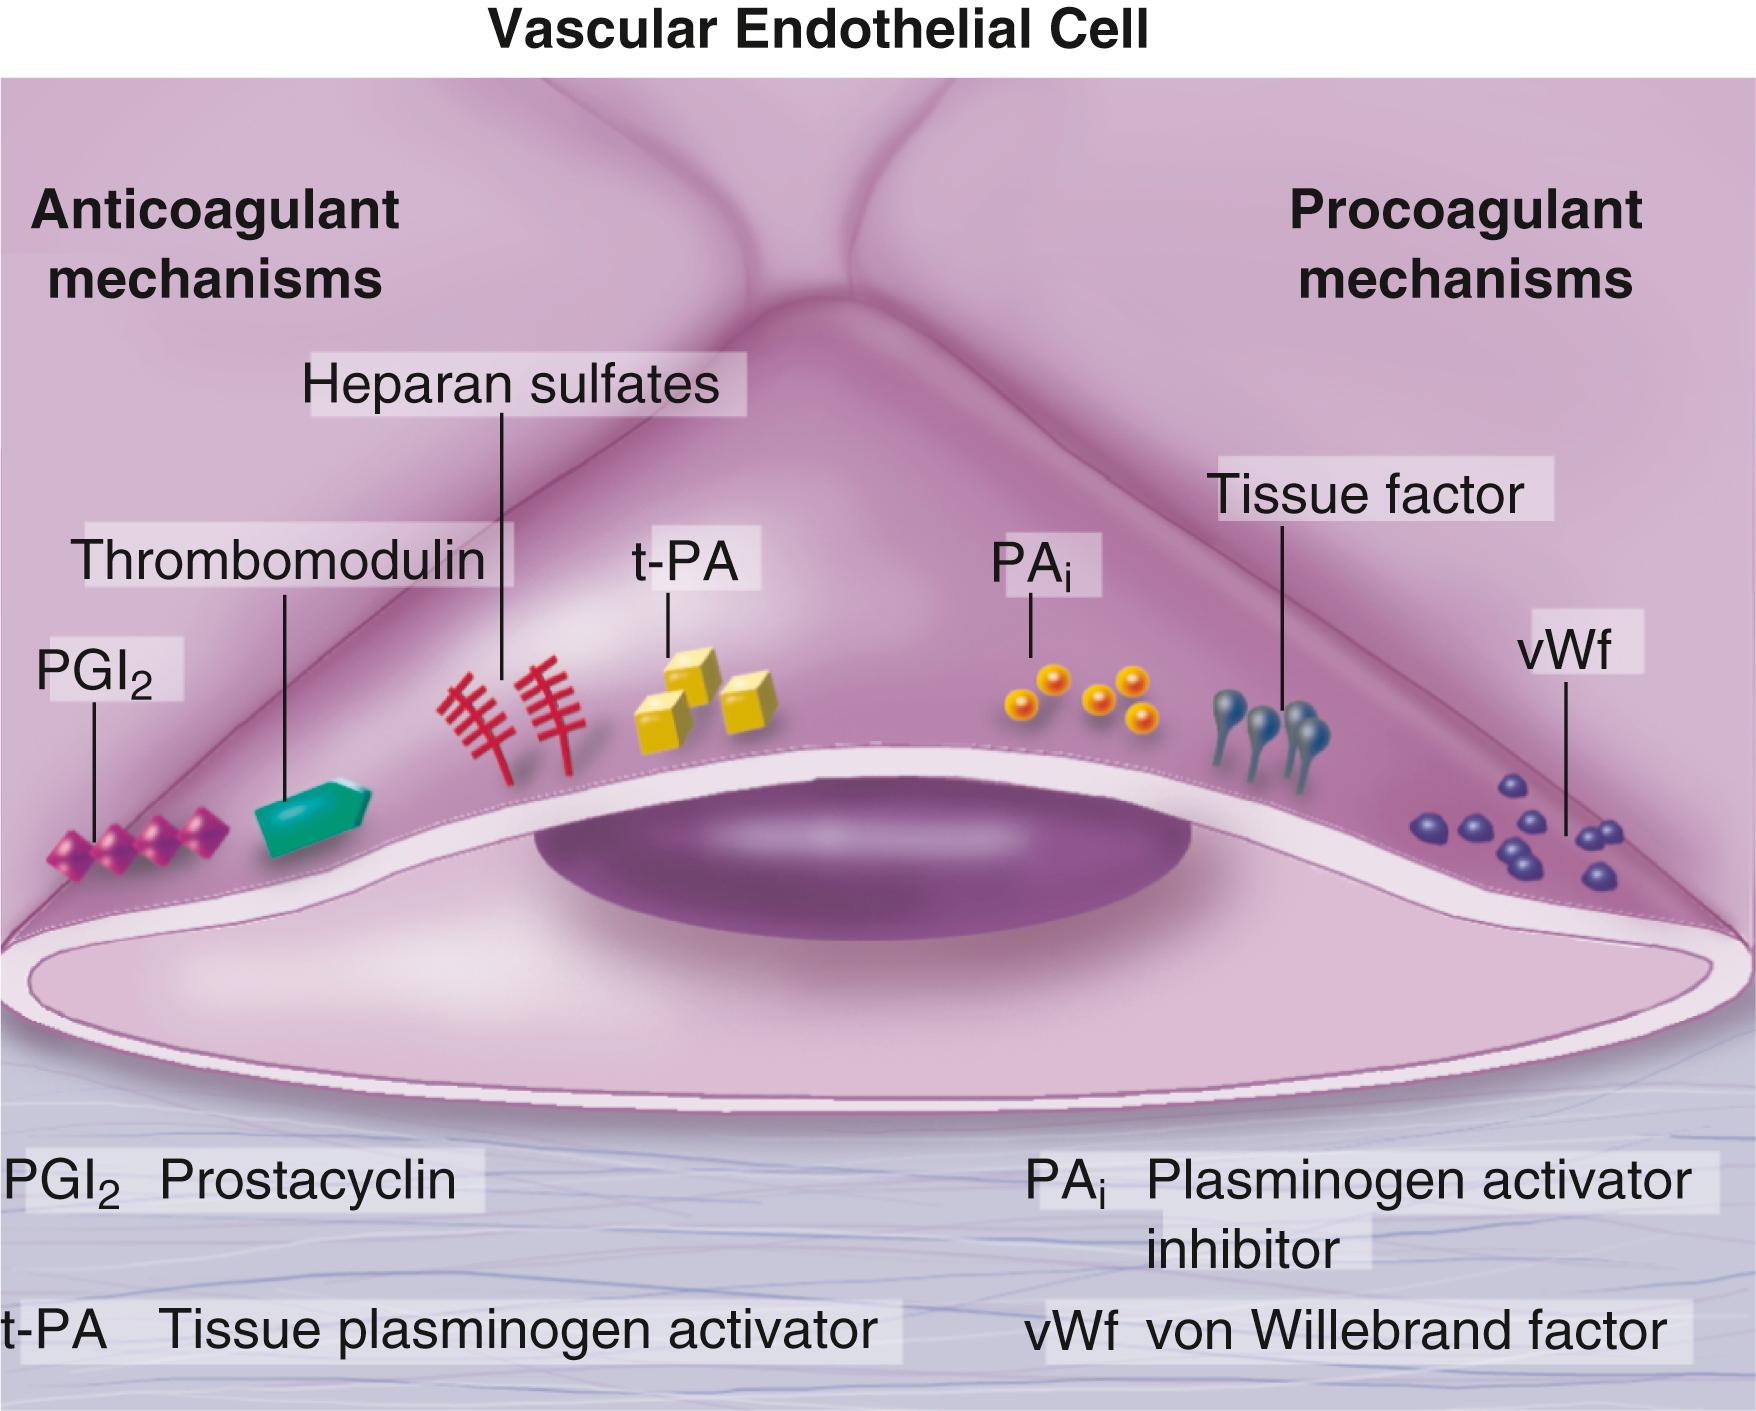 FIGURE 24.2, The endothelial thrombotic balance. This diagram depicts the anticoagulant profibrinolytic functions of the endothelial cell ( left ) and certain procoagulant and antifibrinolytic functions ( right ).